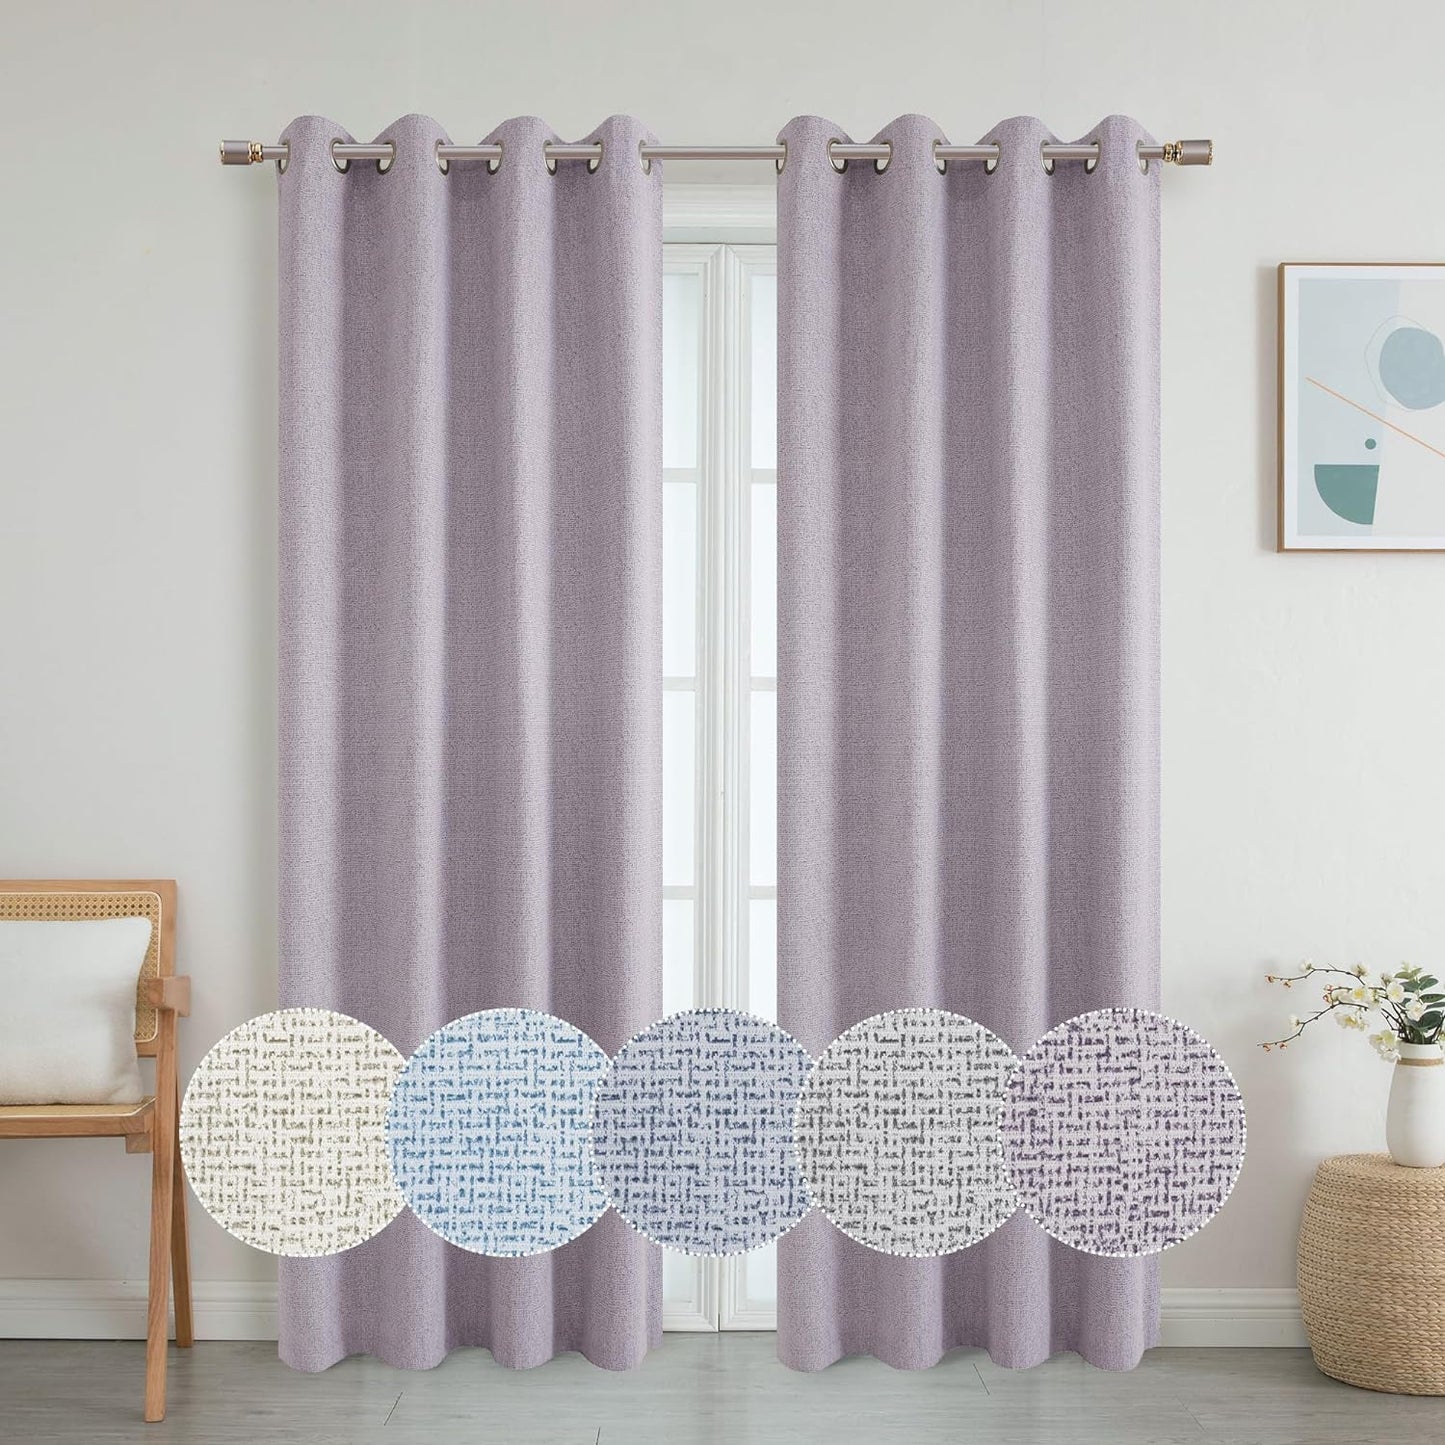 OWENIE Luke Black Out Curtains 63 Inch Long 2 Panels for Bedroom, Geometric Printed Completely Blackout Room Darkening Curtains, Grommet Thermal Insulated Living Room Curtain, 2 PCS, Each 42Wx63L Inch  OWENIE Purple 42"W X 84"L | 2 Pcs 